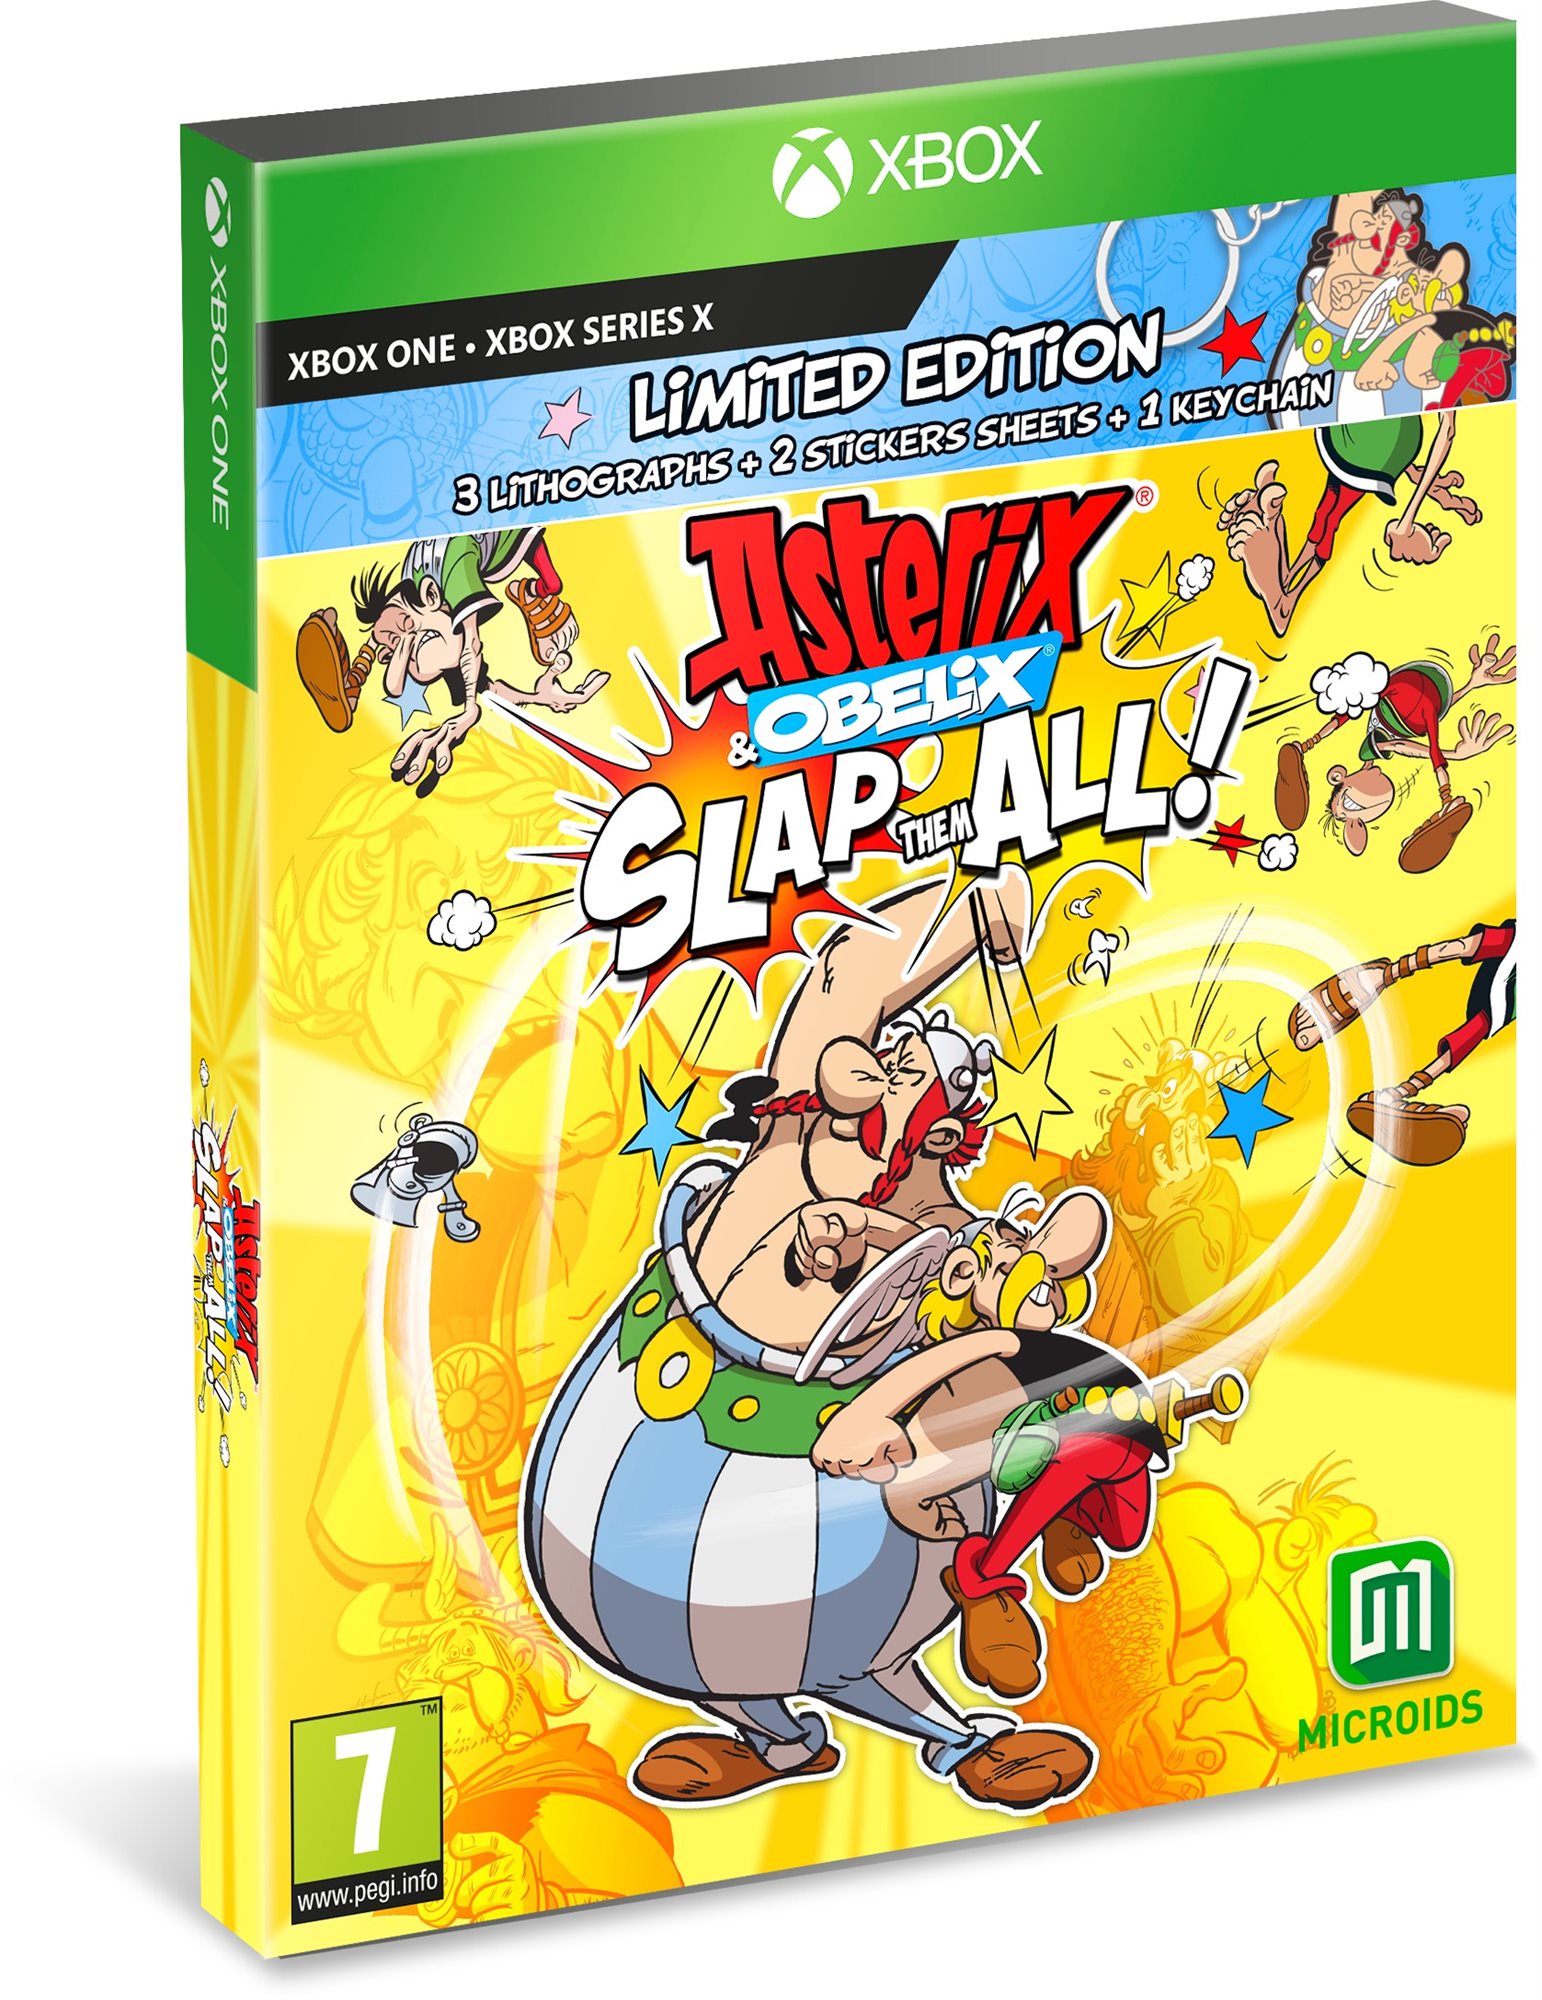 Asterix and Obelix: Slap Them All! Limited Edition - Xbox One